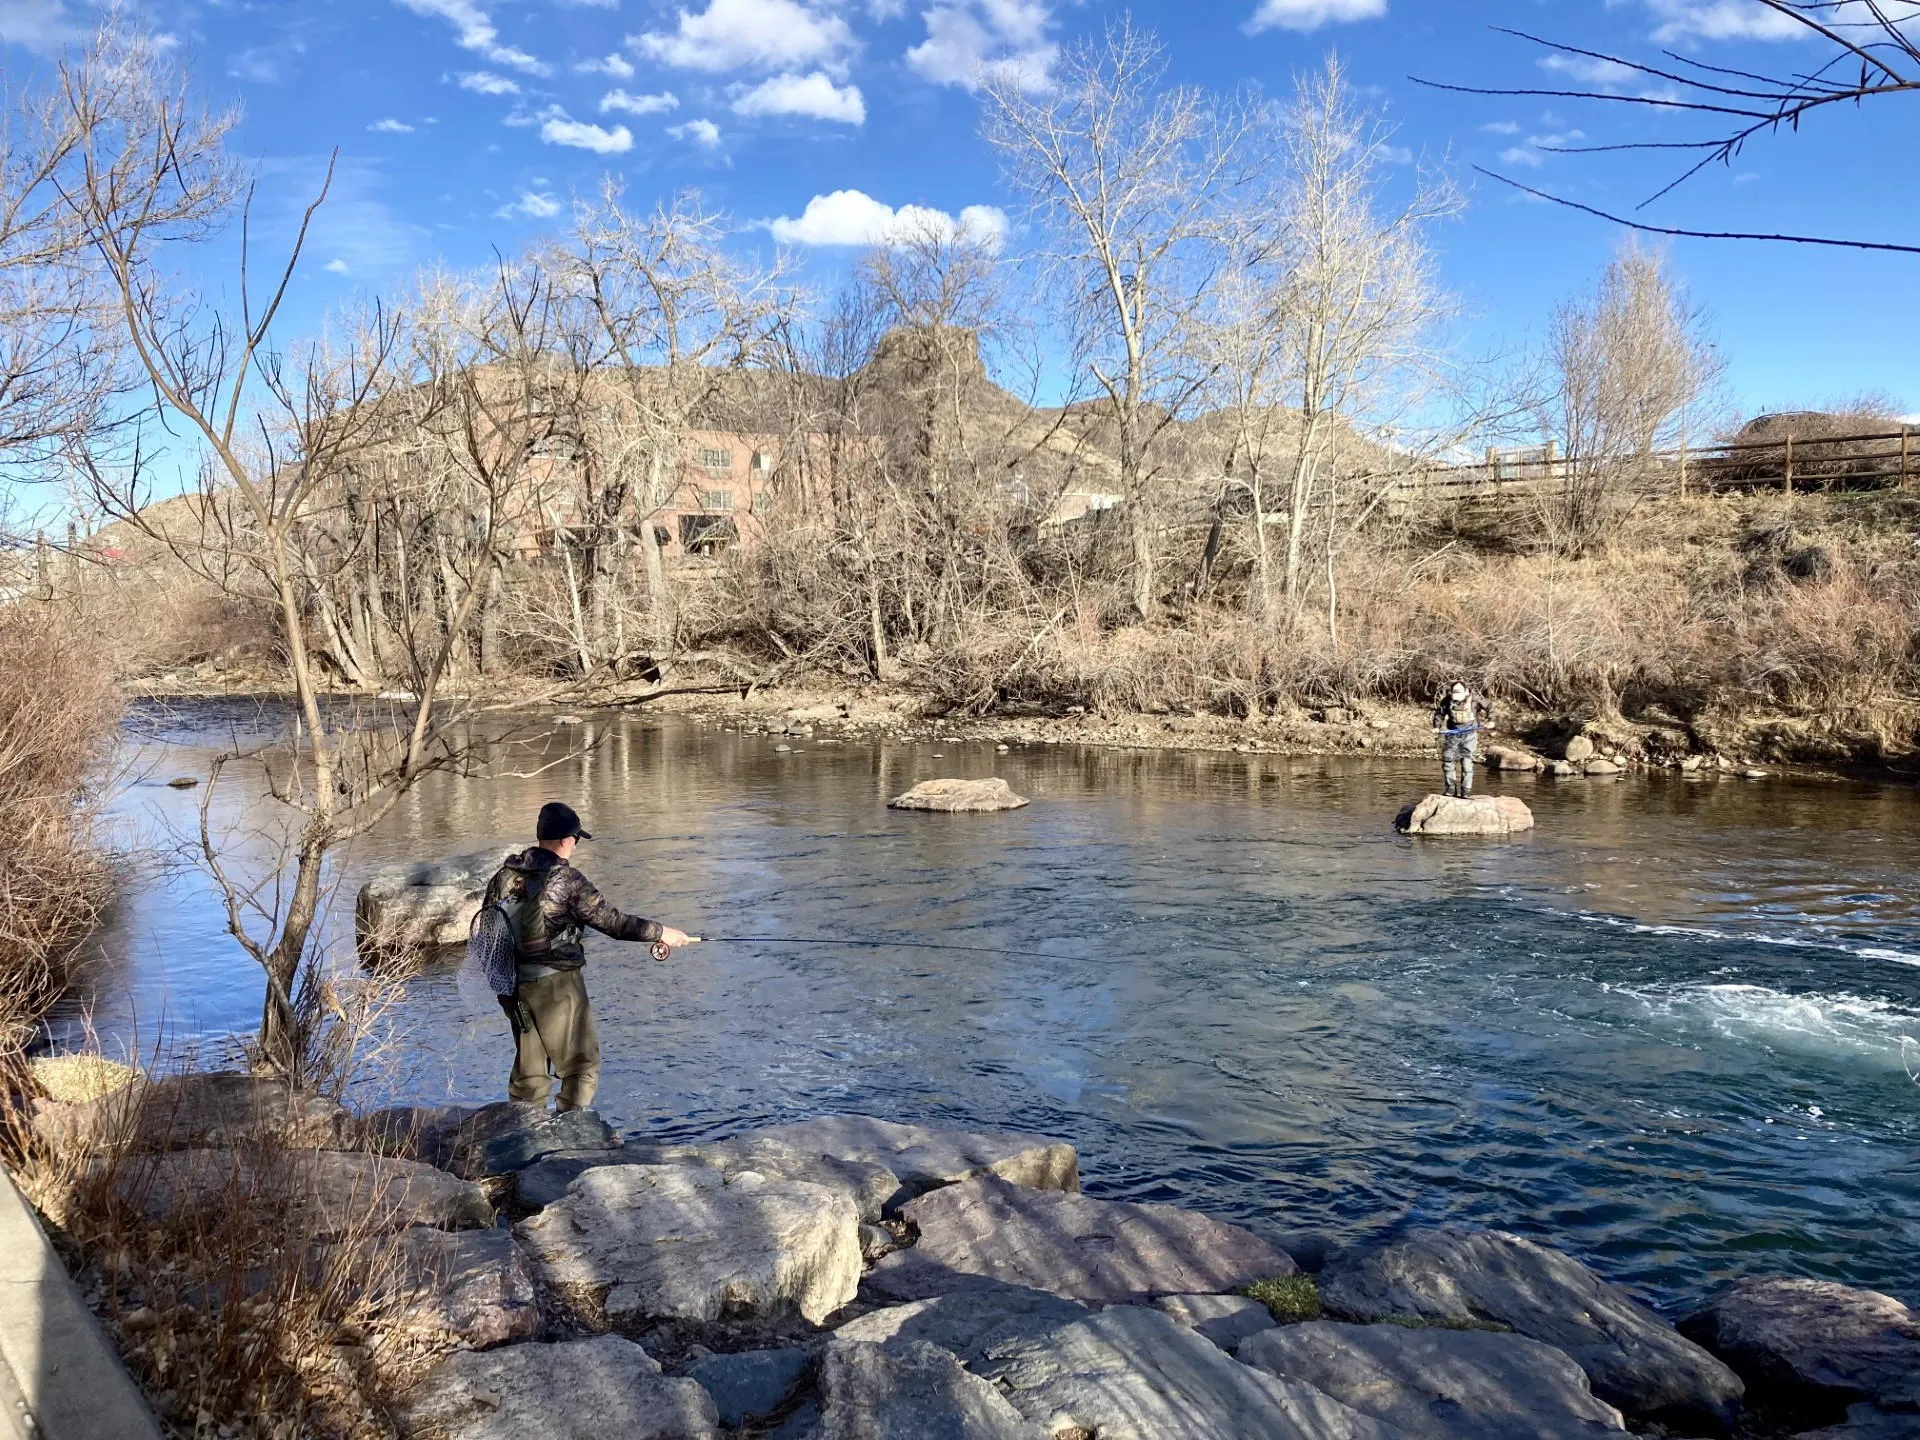 Two fishermen, dressed for cold whether, sand on rocks, fishing in Clear Creek.